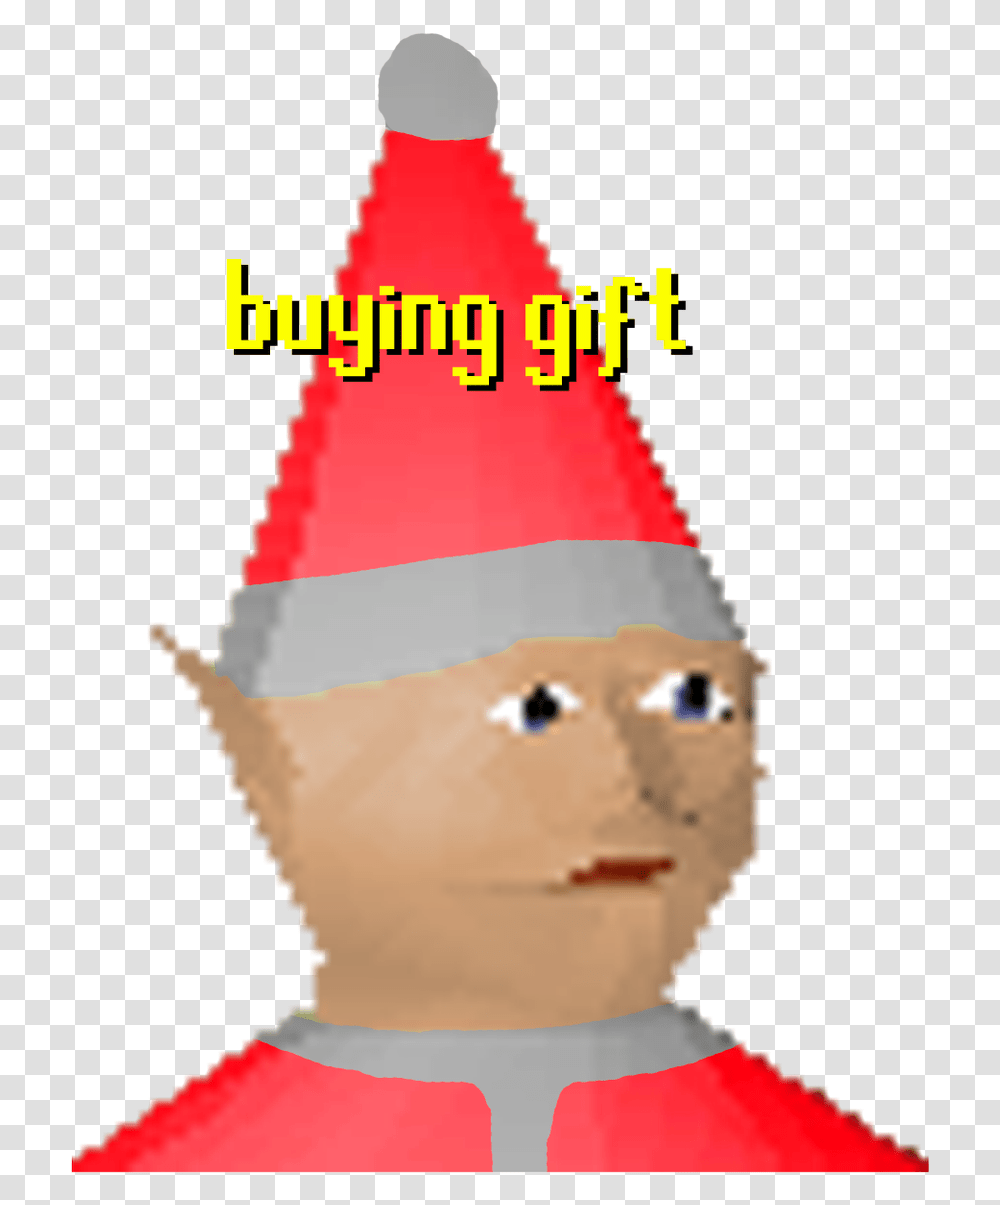 Jpg Royalty Free Gnomechild Hashtag On Twitter Runescape Gnome Child, Apparel, Party Hat, Cone Transparent Png